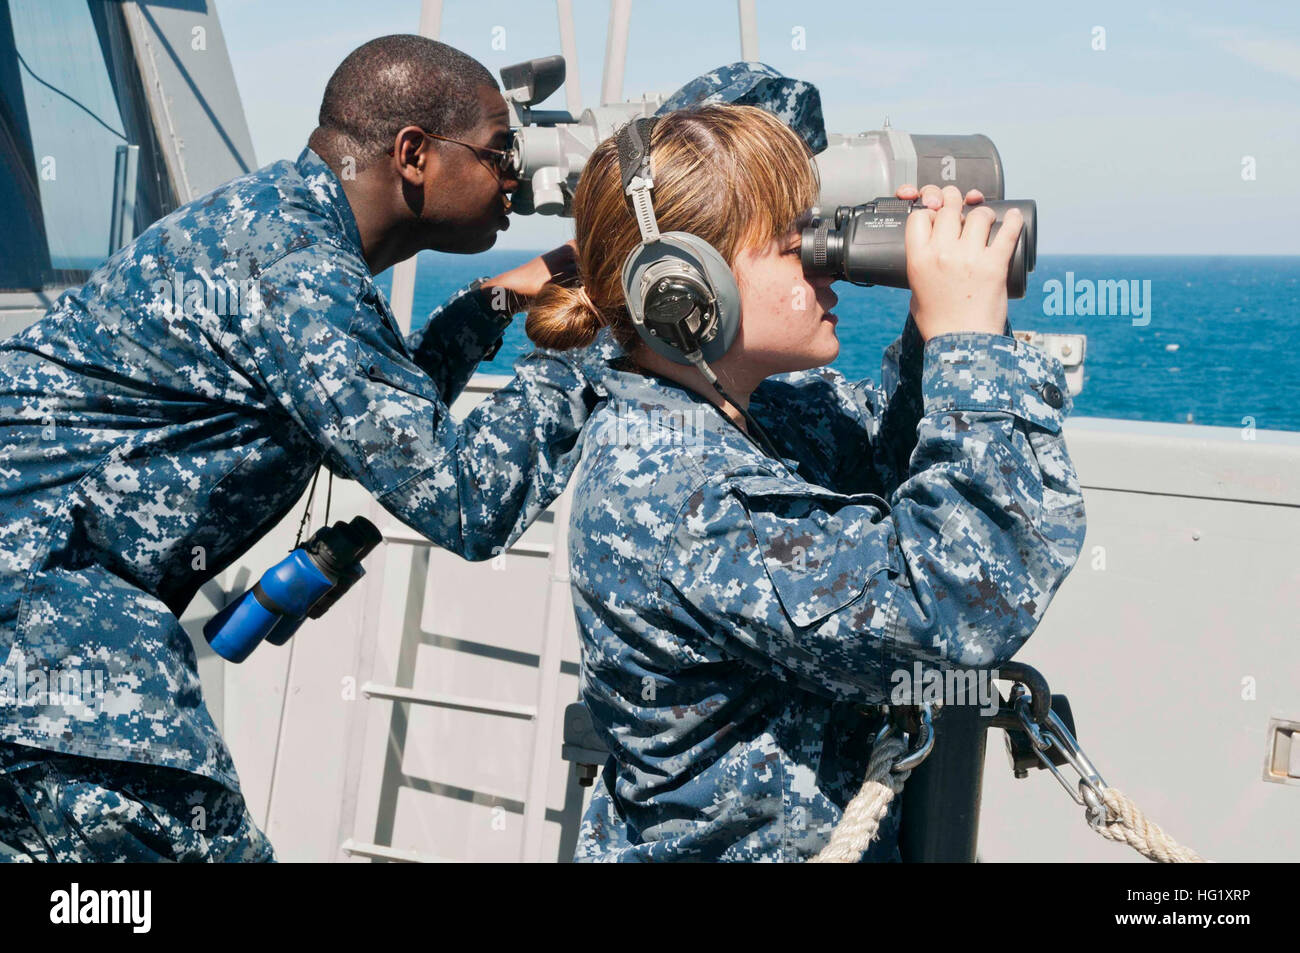 1400303-N-YO707-004 ATLANTIC OCEAN (March 3, 2014) Ensign Joel A. Sam, left, and Seaman Apprentice Justinne Ivanitskiy check the horizon through for surface contacts aboard the amphibious transport dock ship USS New York (LPD 21). New York is underway conducting a routine training exercise. (U.S. Navy photo by: Mass Communication Specialist 2nd Class Cyrus Roson/Released) USS New York operations 140303-N-YO707-004 Stock Photo